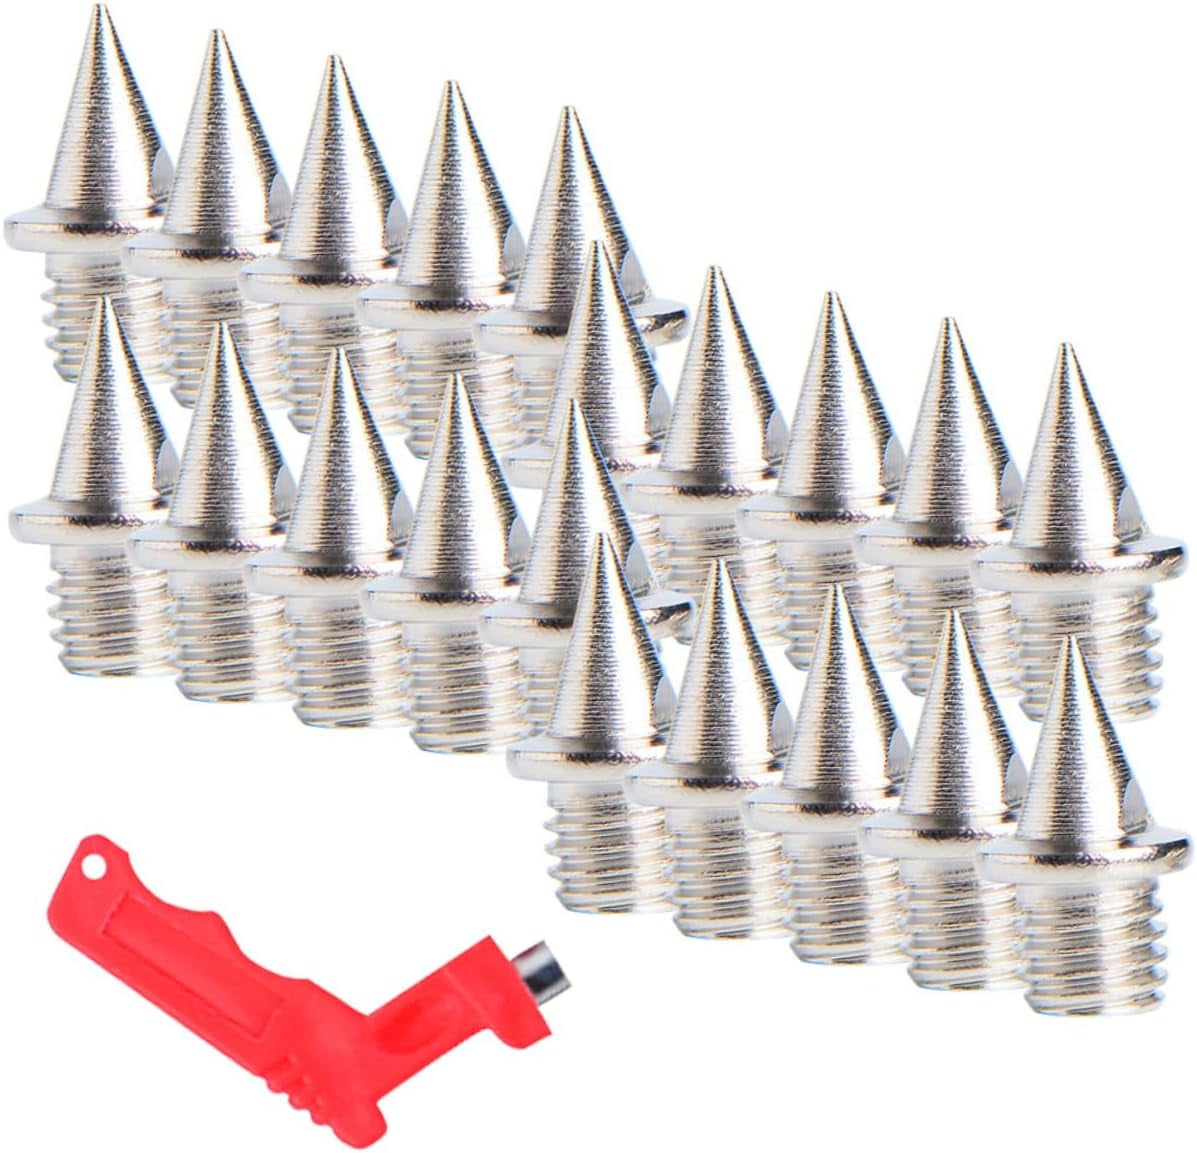 100 Pcs Track Spikes Replacement Nails Spikes With Spike Wrench Stainless  Steel Replacement For Sports Shoes Long Jump Athletics Sprint